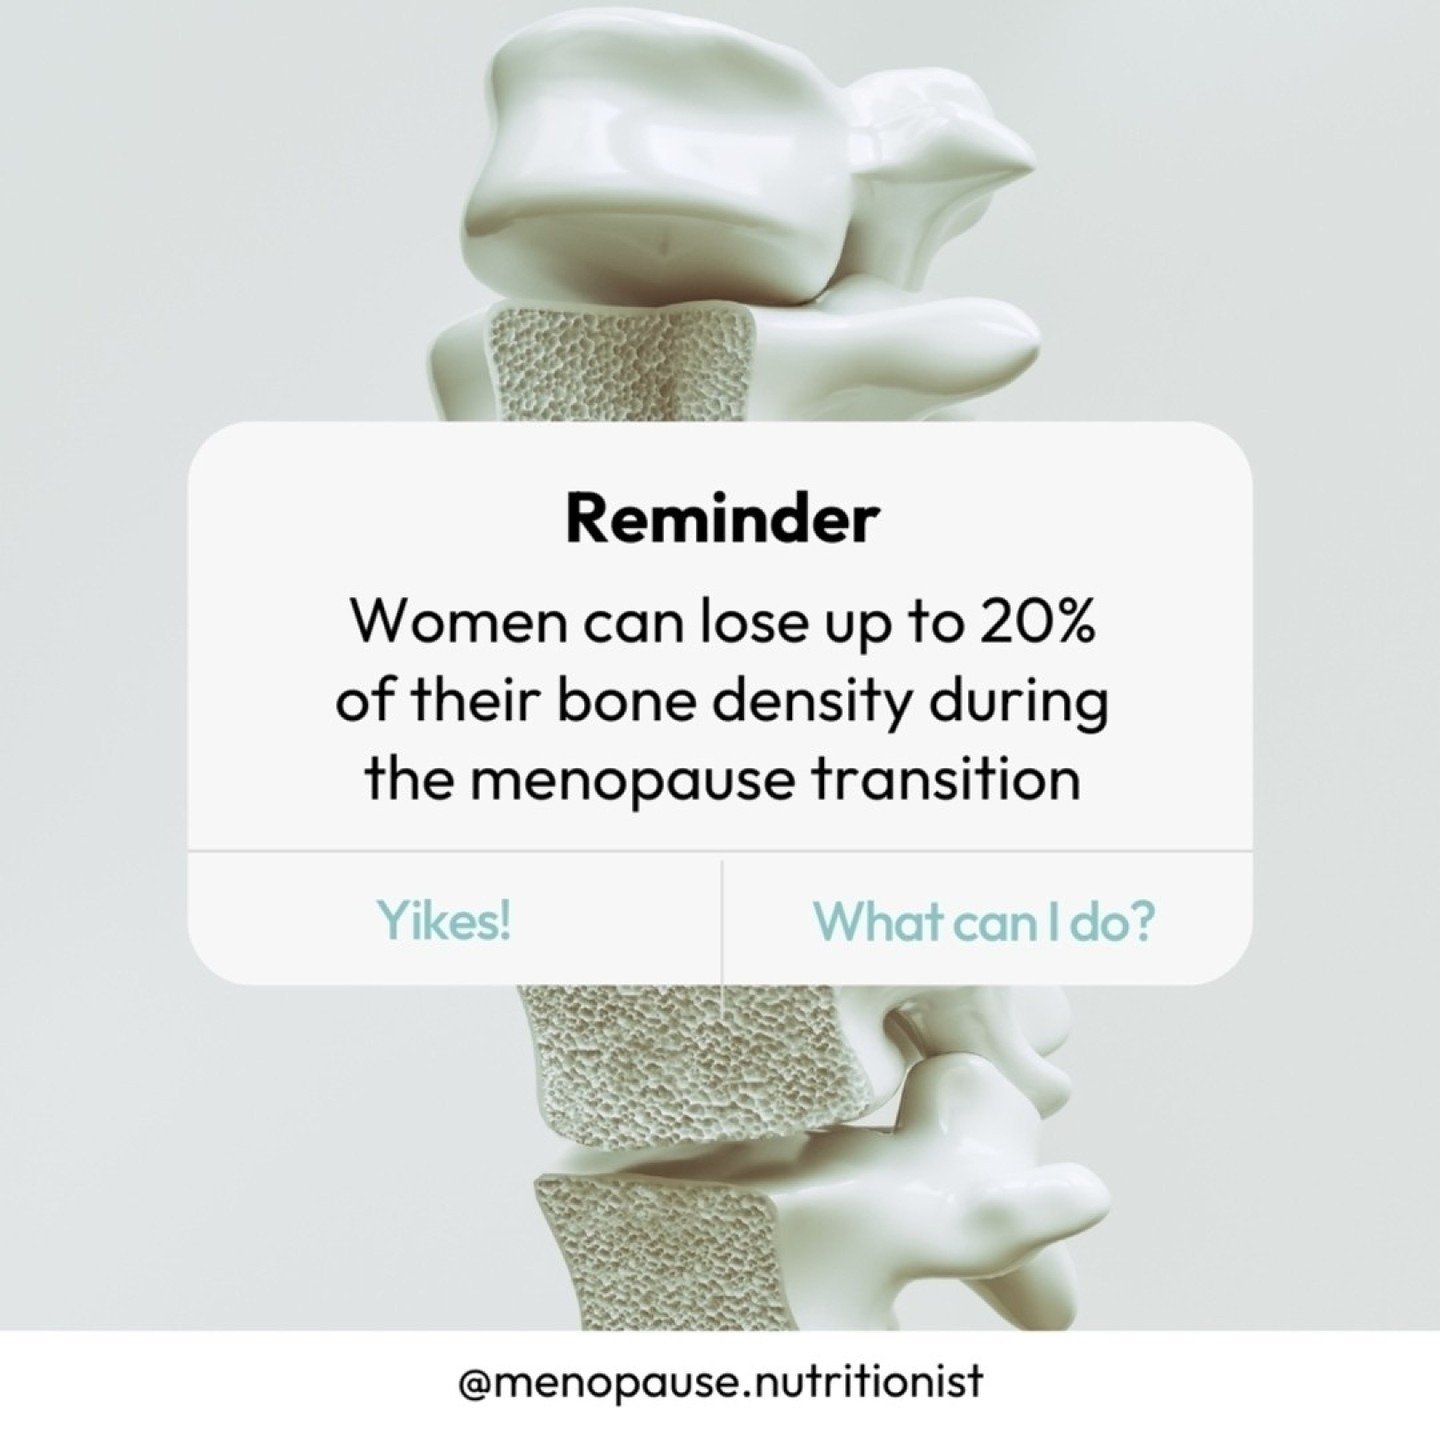 It's never too late to make your bones🦴a priority in midlife! 

You've probably heard that bone density decreases in menopause in large part due to the changes in estrogen, but do you have a good understanding of what the nutrition priorities are to